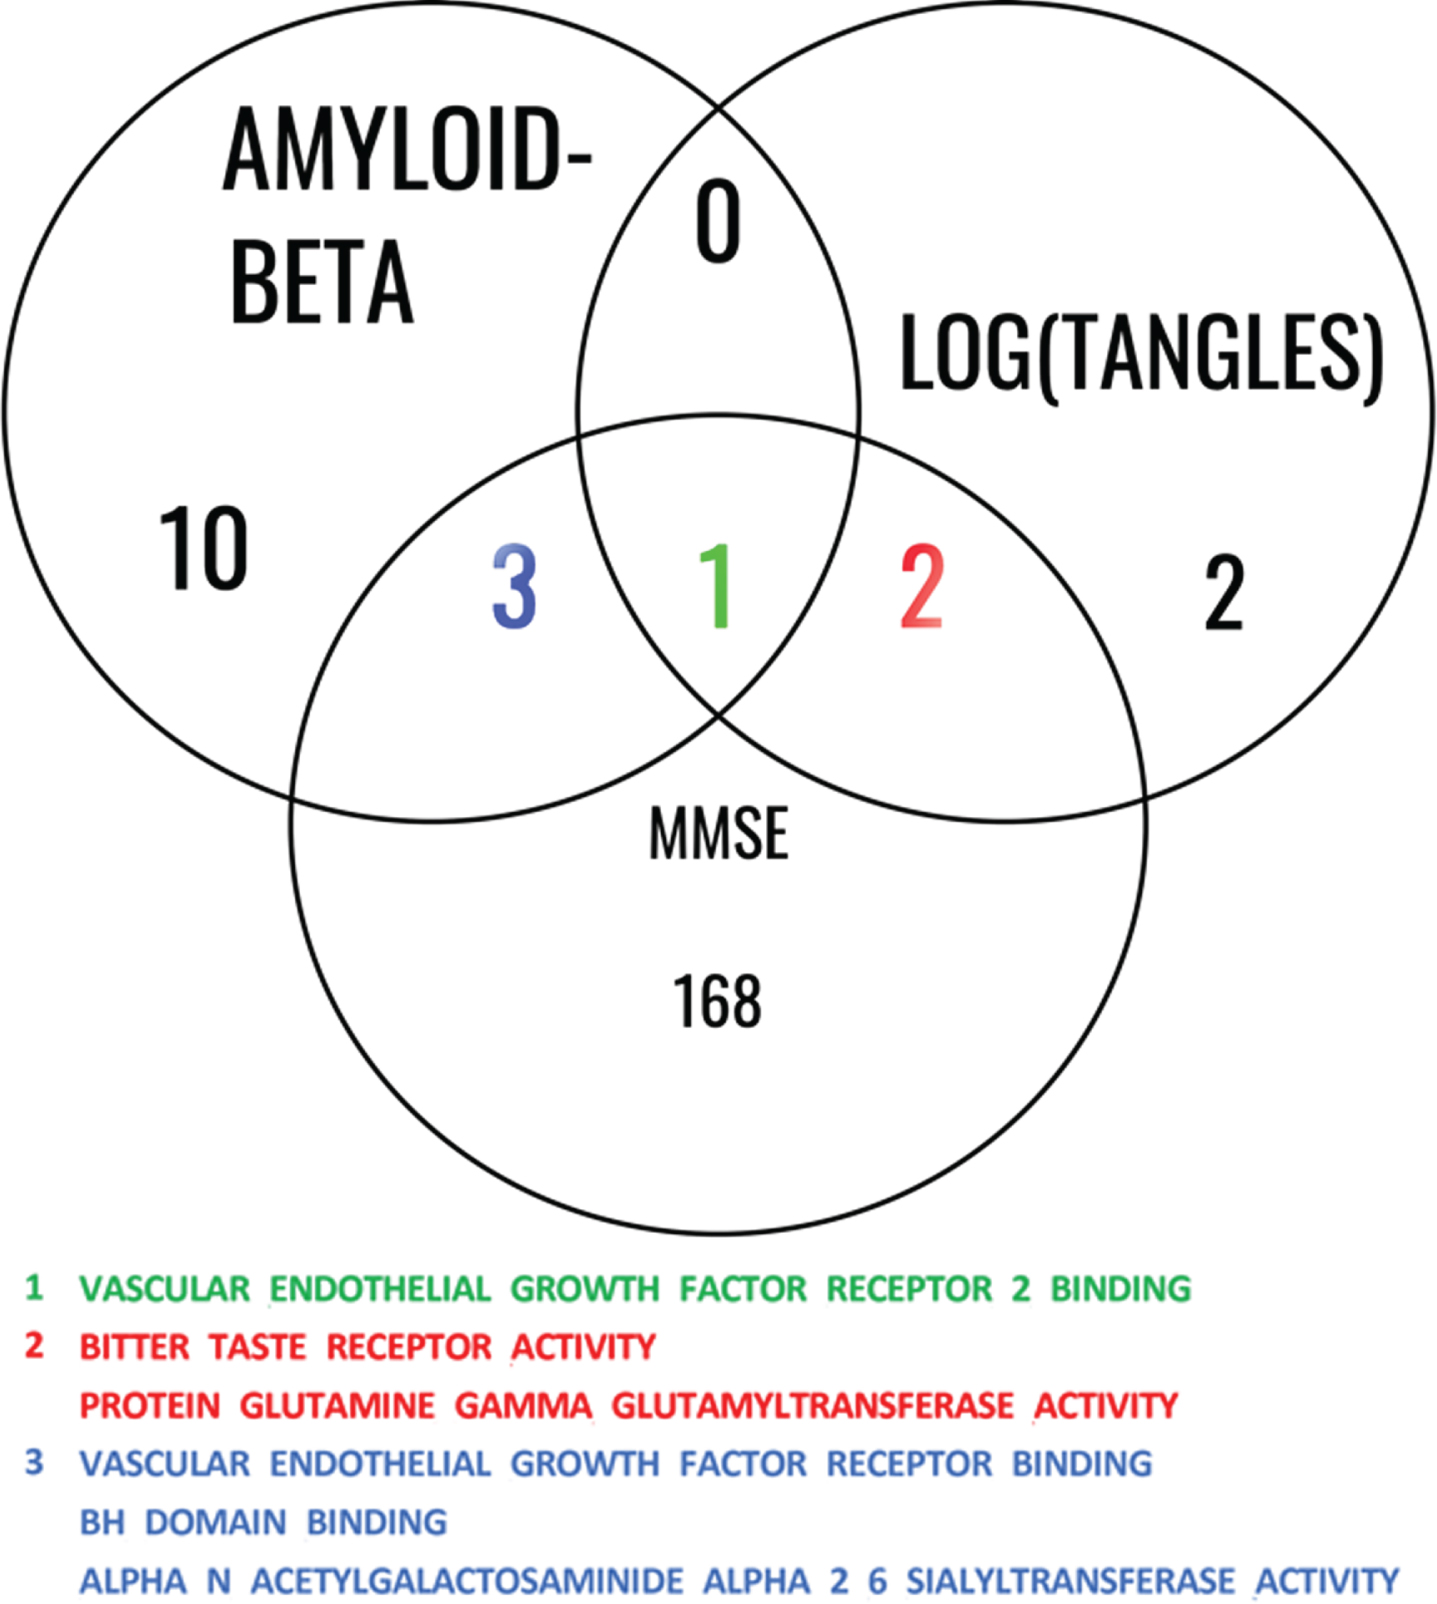 Common significant pathways for Aβ, log(tangles), and MMSE. This Venn diagram illustrates the common pathways identified among the studies involving Aβ, log(tangles), and MMSE. The diagram consists of overlapping circles that represent each study, with labeled sections indicating the shared pathways among them. The shared pathways are listed within the diagram, providing a concise overview of the biological processes and molecular mechanisms that are consistently implicated across these phenotypes. This analysis highlights the interconnectedness of these factors and underlying gene ontology molecular function (GOMF) pathways that contribute to the associations between Aβ, log(tangles), and MMSE.